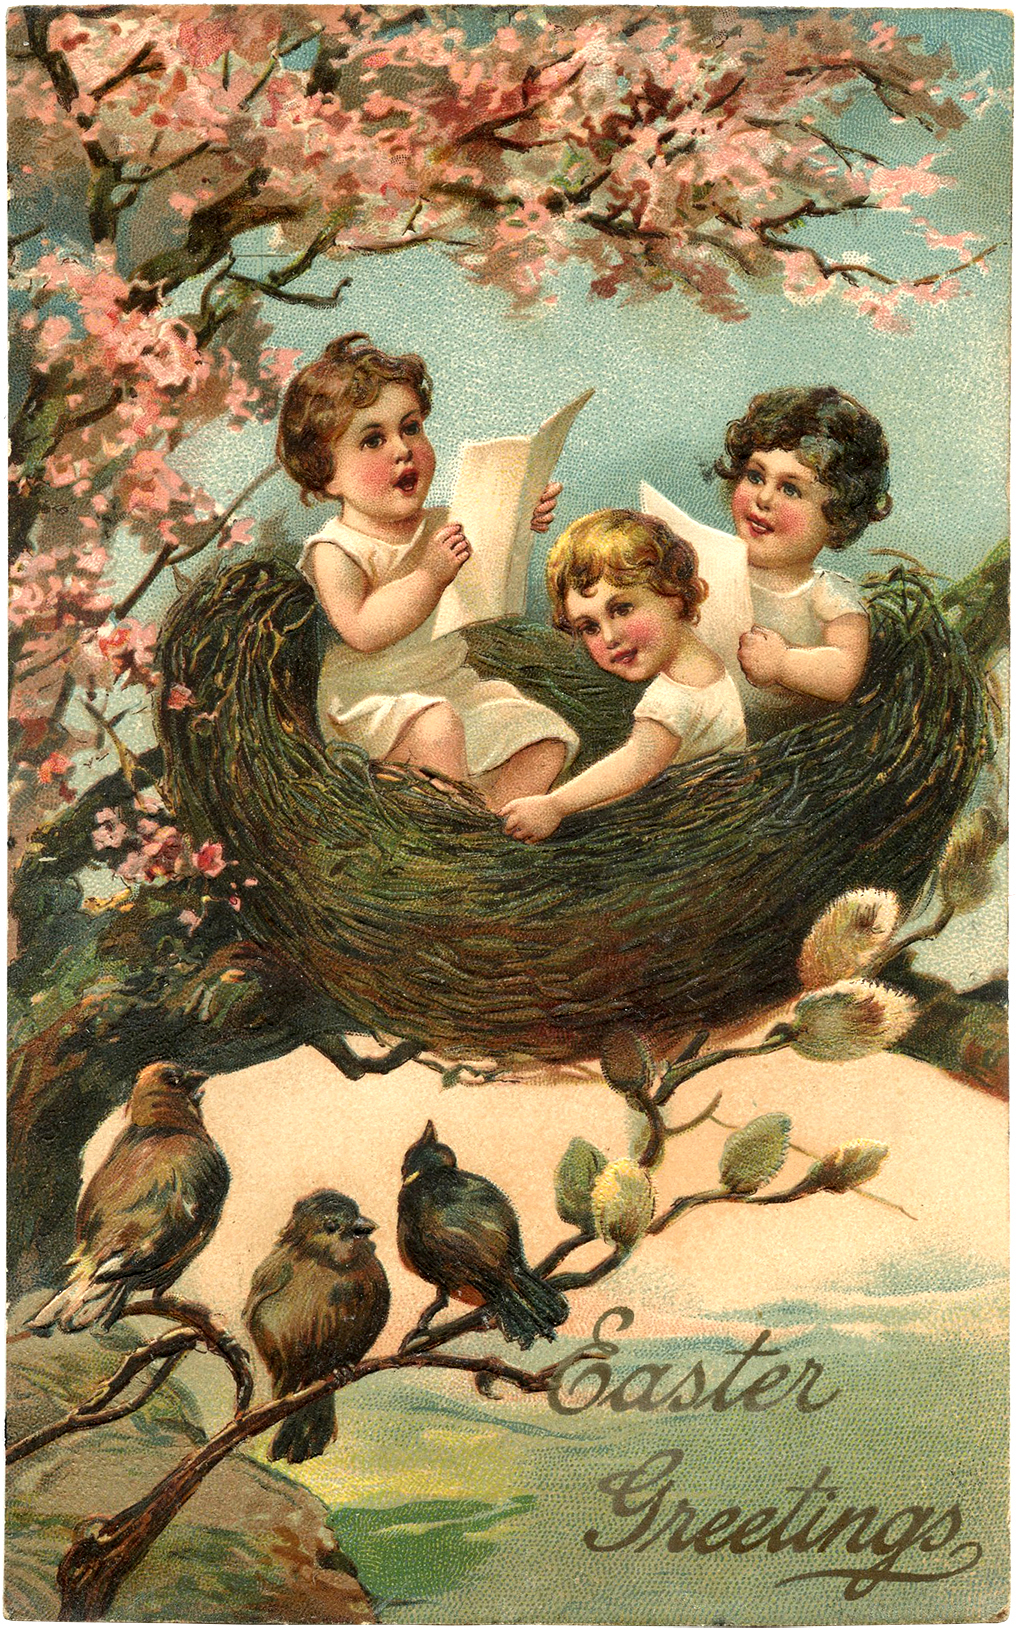 http://thegraphicsfairy.com/wp-content/uploads/2014/03/Vintage-Easter-Nest-Picture-2-GraphicsFairy.jpg